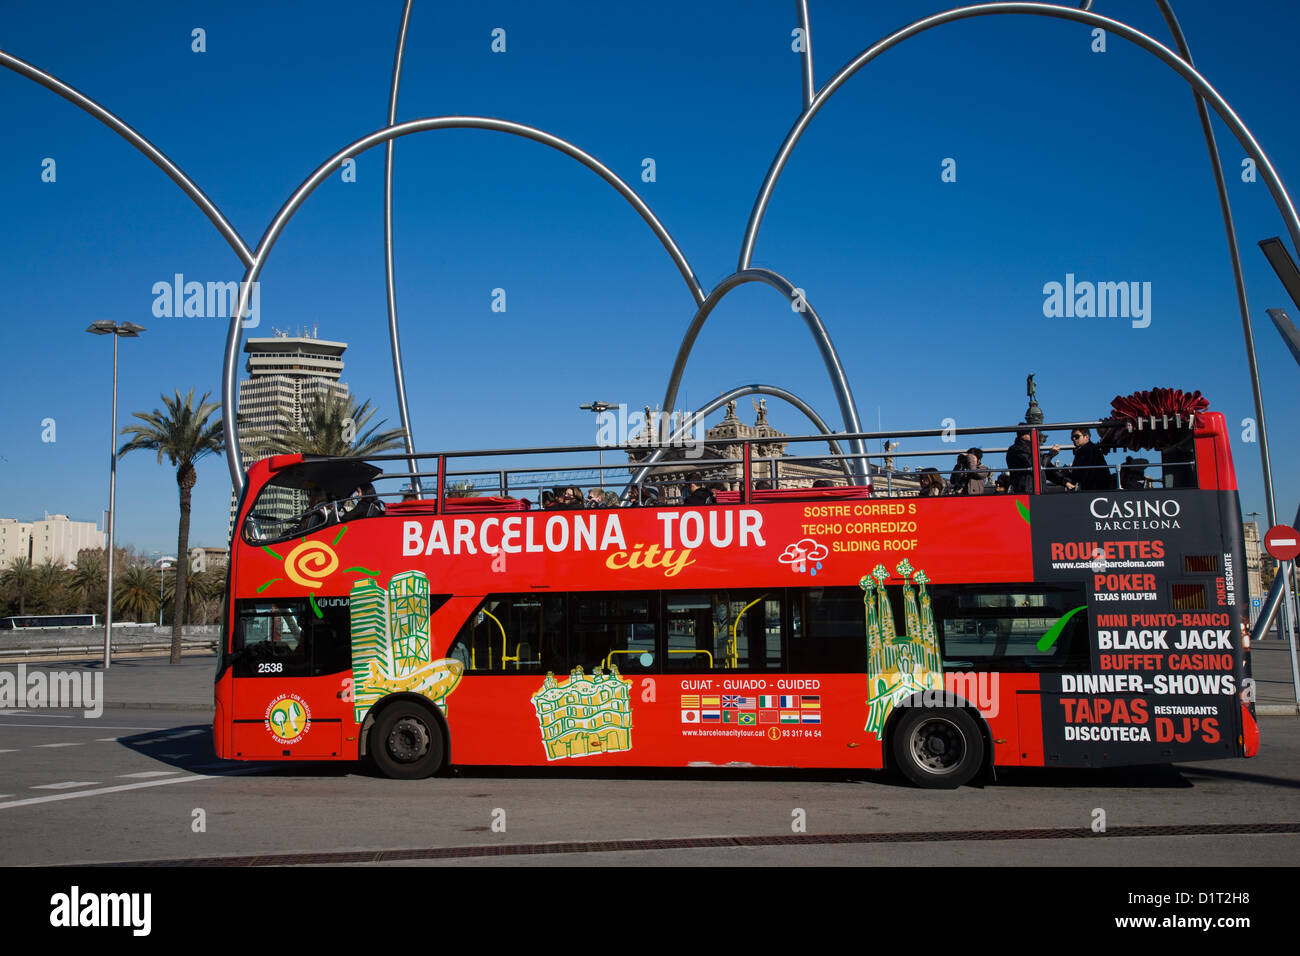 City sightseeing double decker bus tour in Barcellona, Spagna Foto Stock